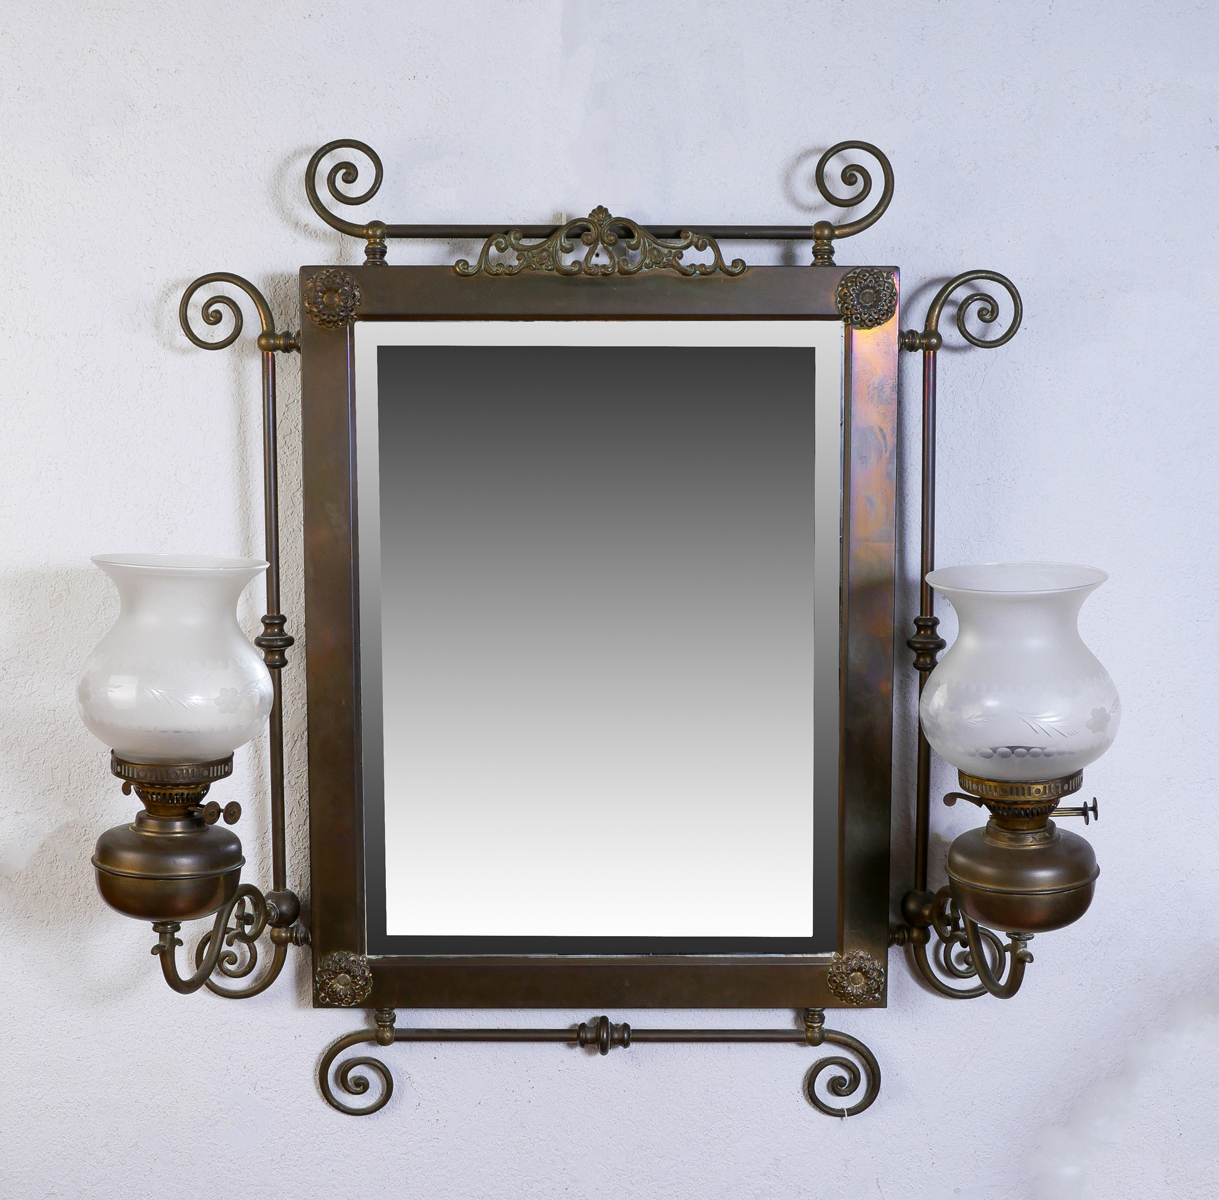 BRASS WALL MIRROR WITH SCONCES  36b3c2